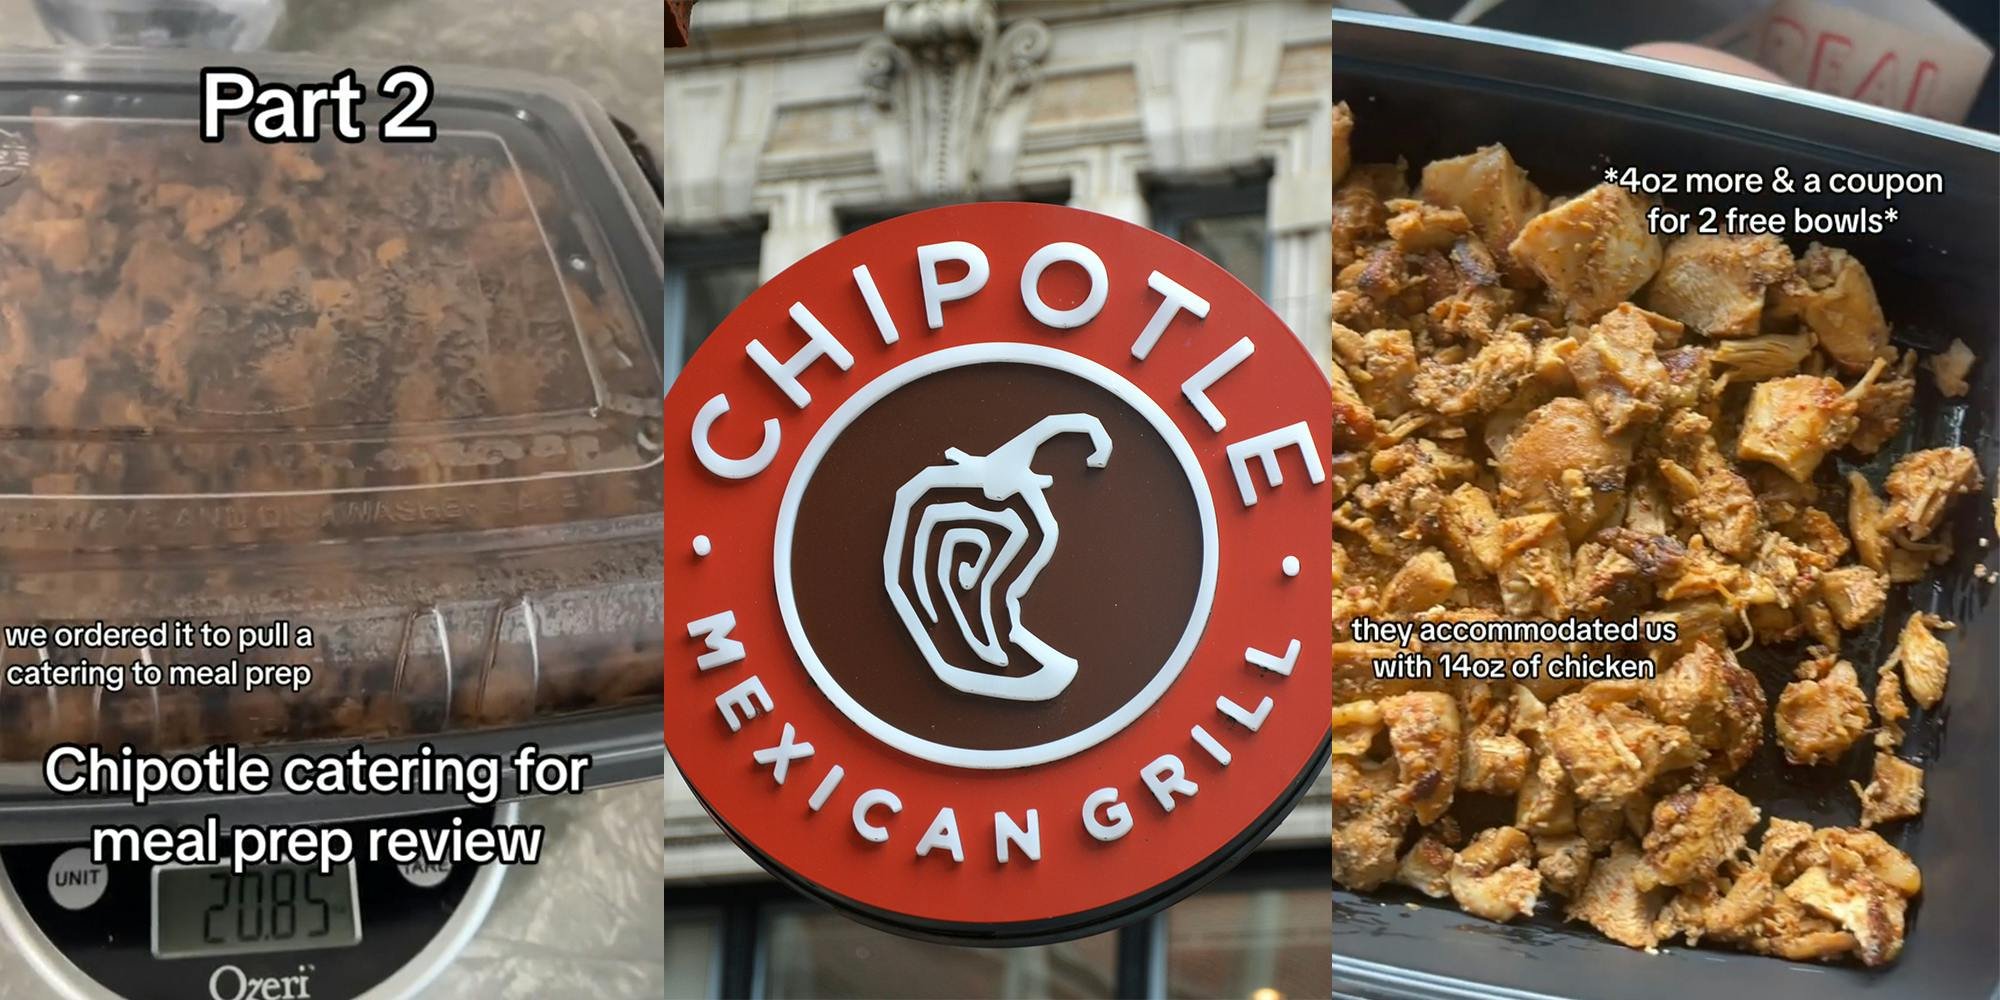 Viewers defend Chipotle customer who complained about getting skimped on 10 ounces of chicken